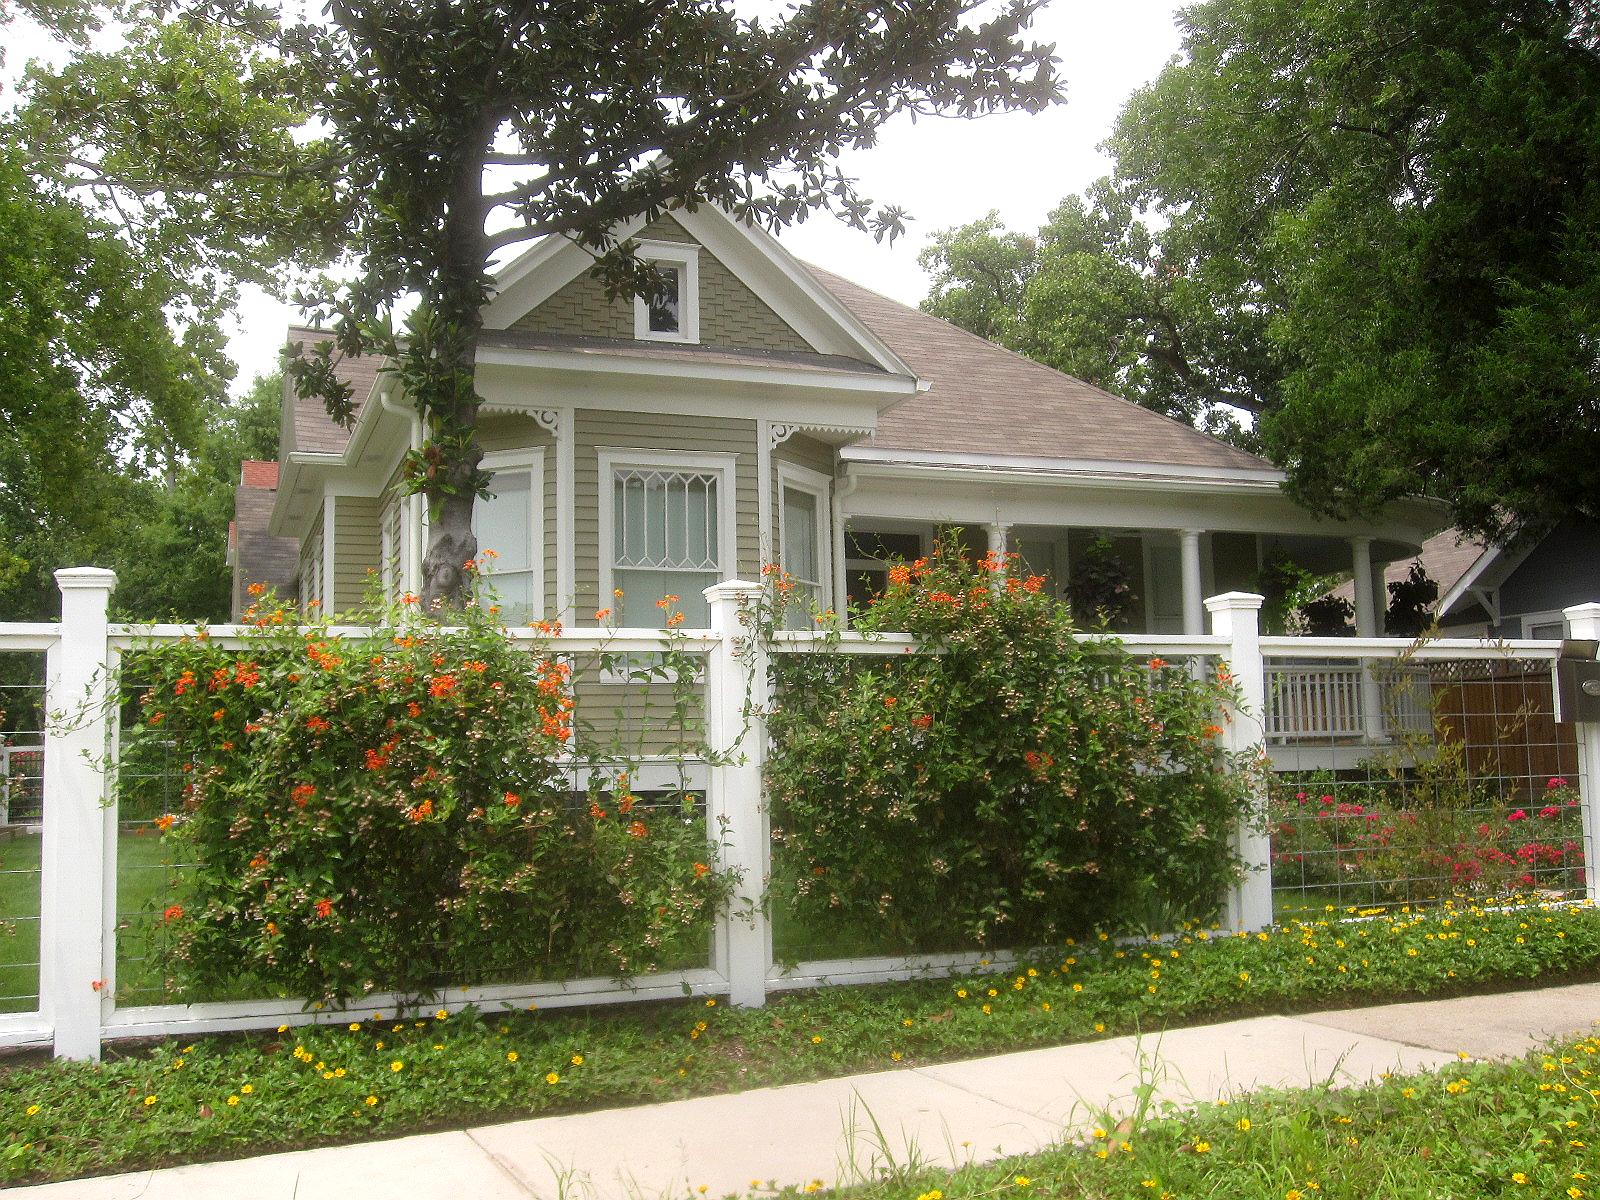 The OtHeR HoUsToN: BUNGALOW FRONT YARD GARDEN IDEAS